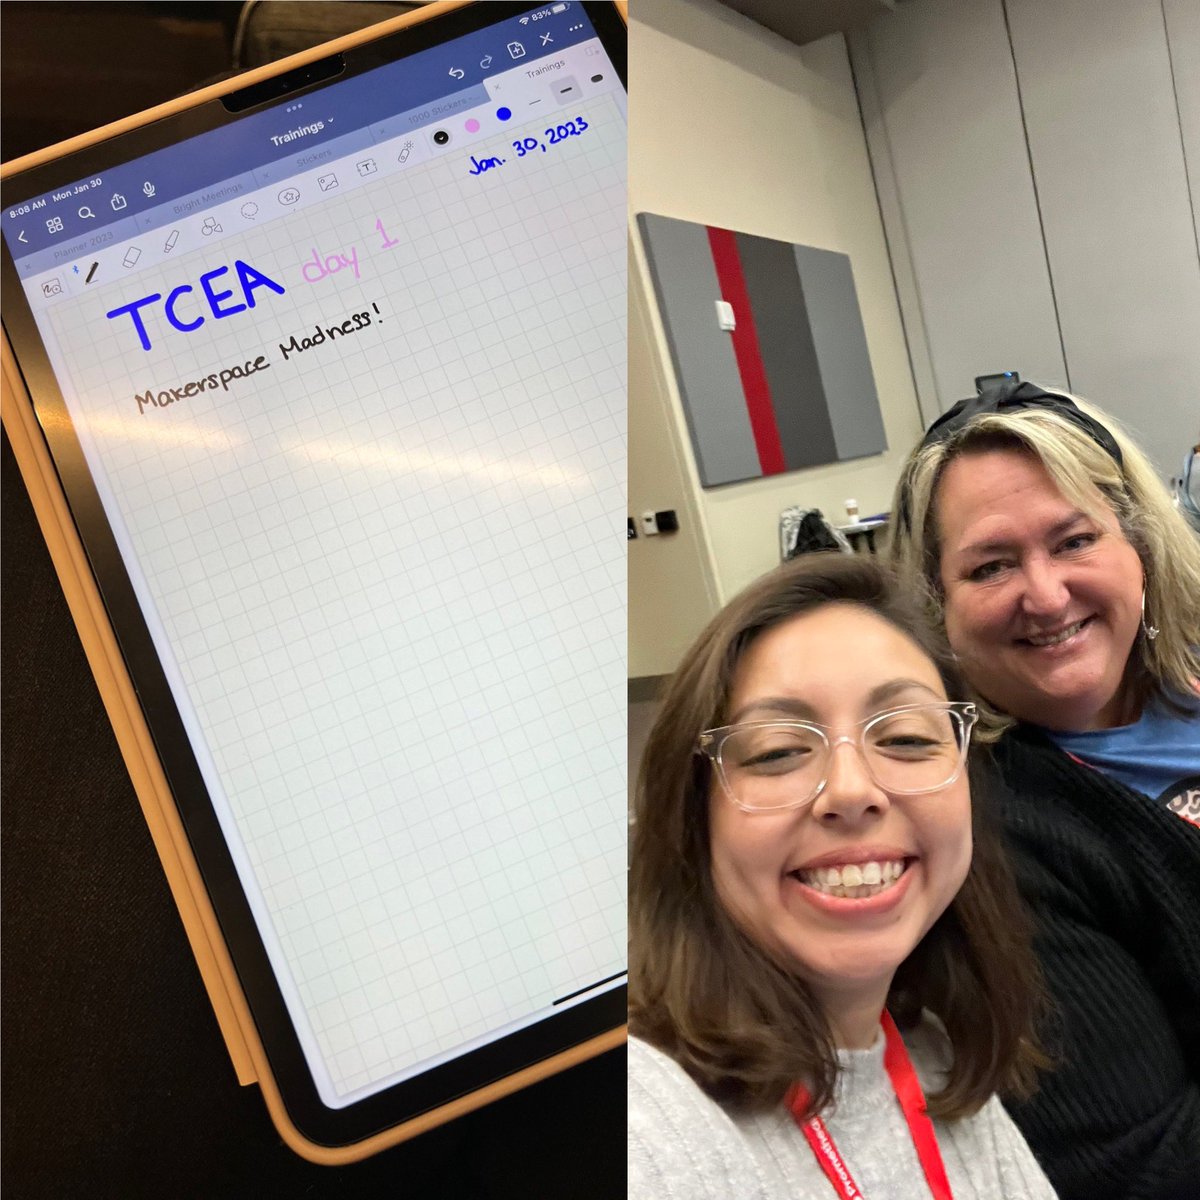 Ready to learn all the things with this beautiful lady!! 😊❤️@TCEA #FISDmadetoshine @FriscoISDTech @PrideRidlehuber